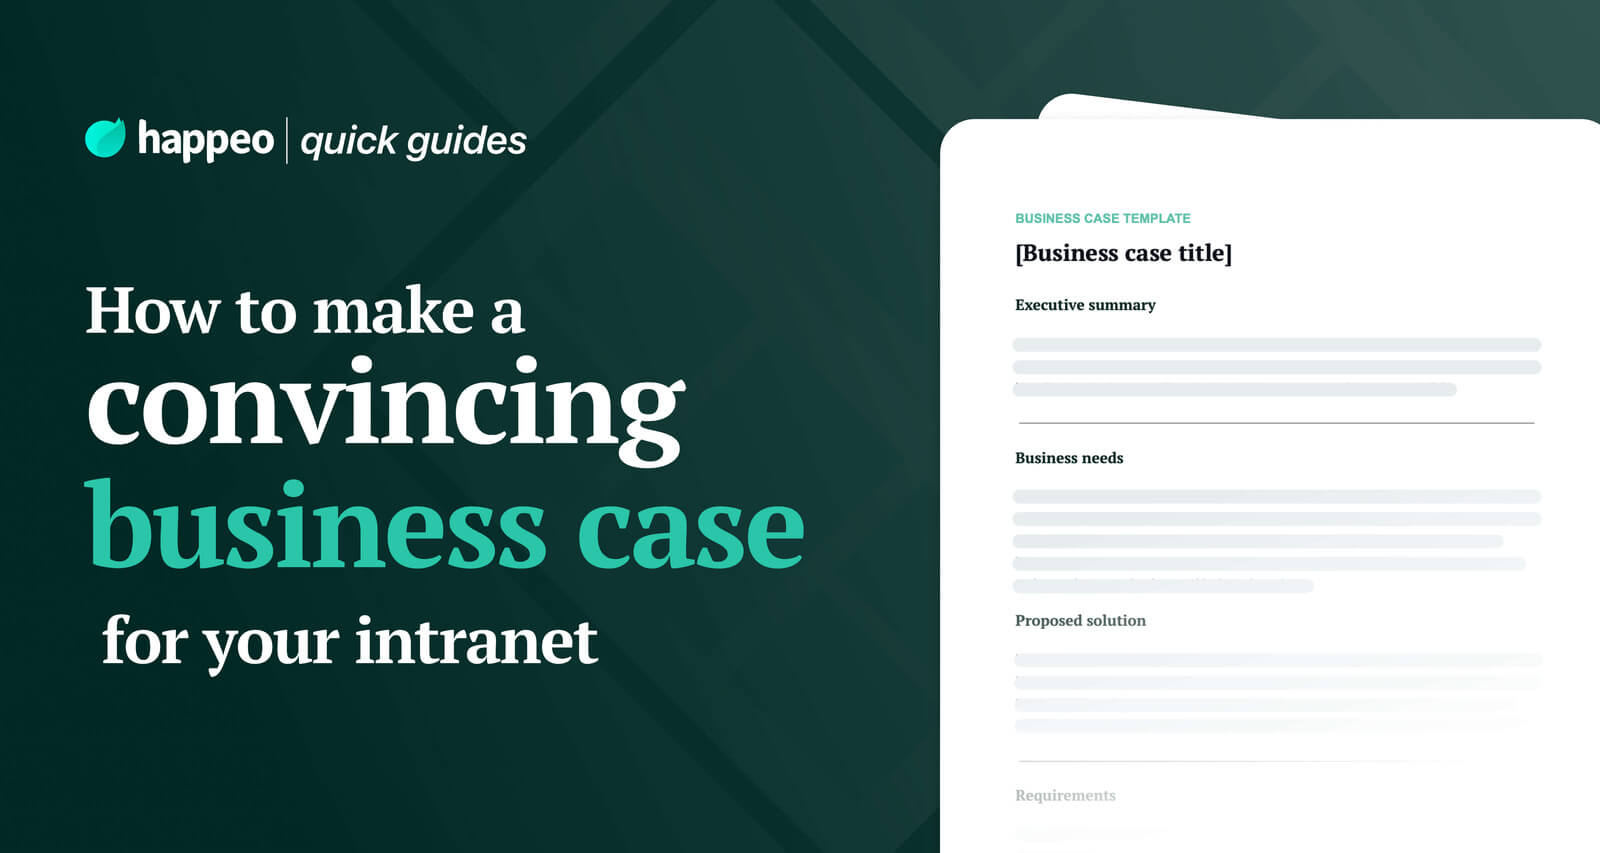 How to make a convincing business case for your intranet